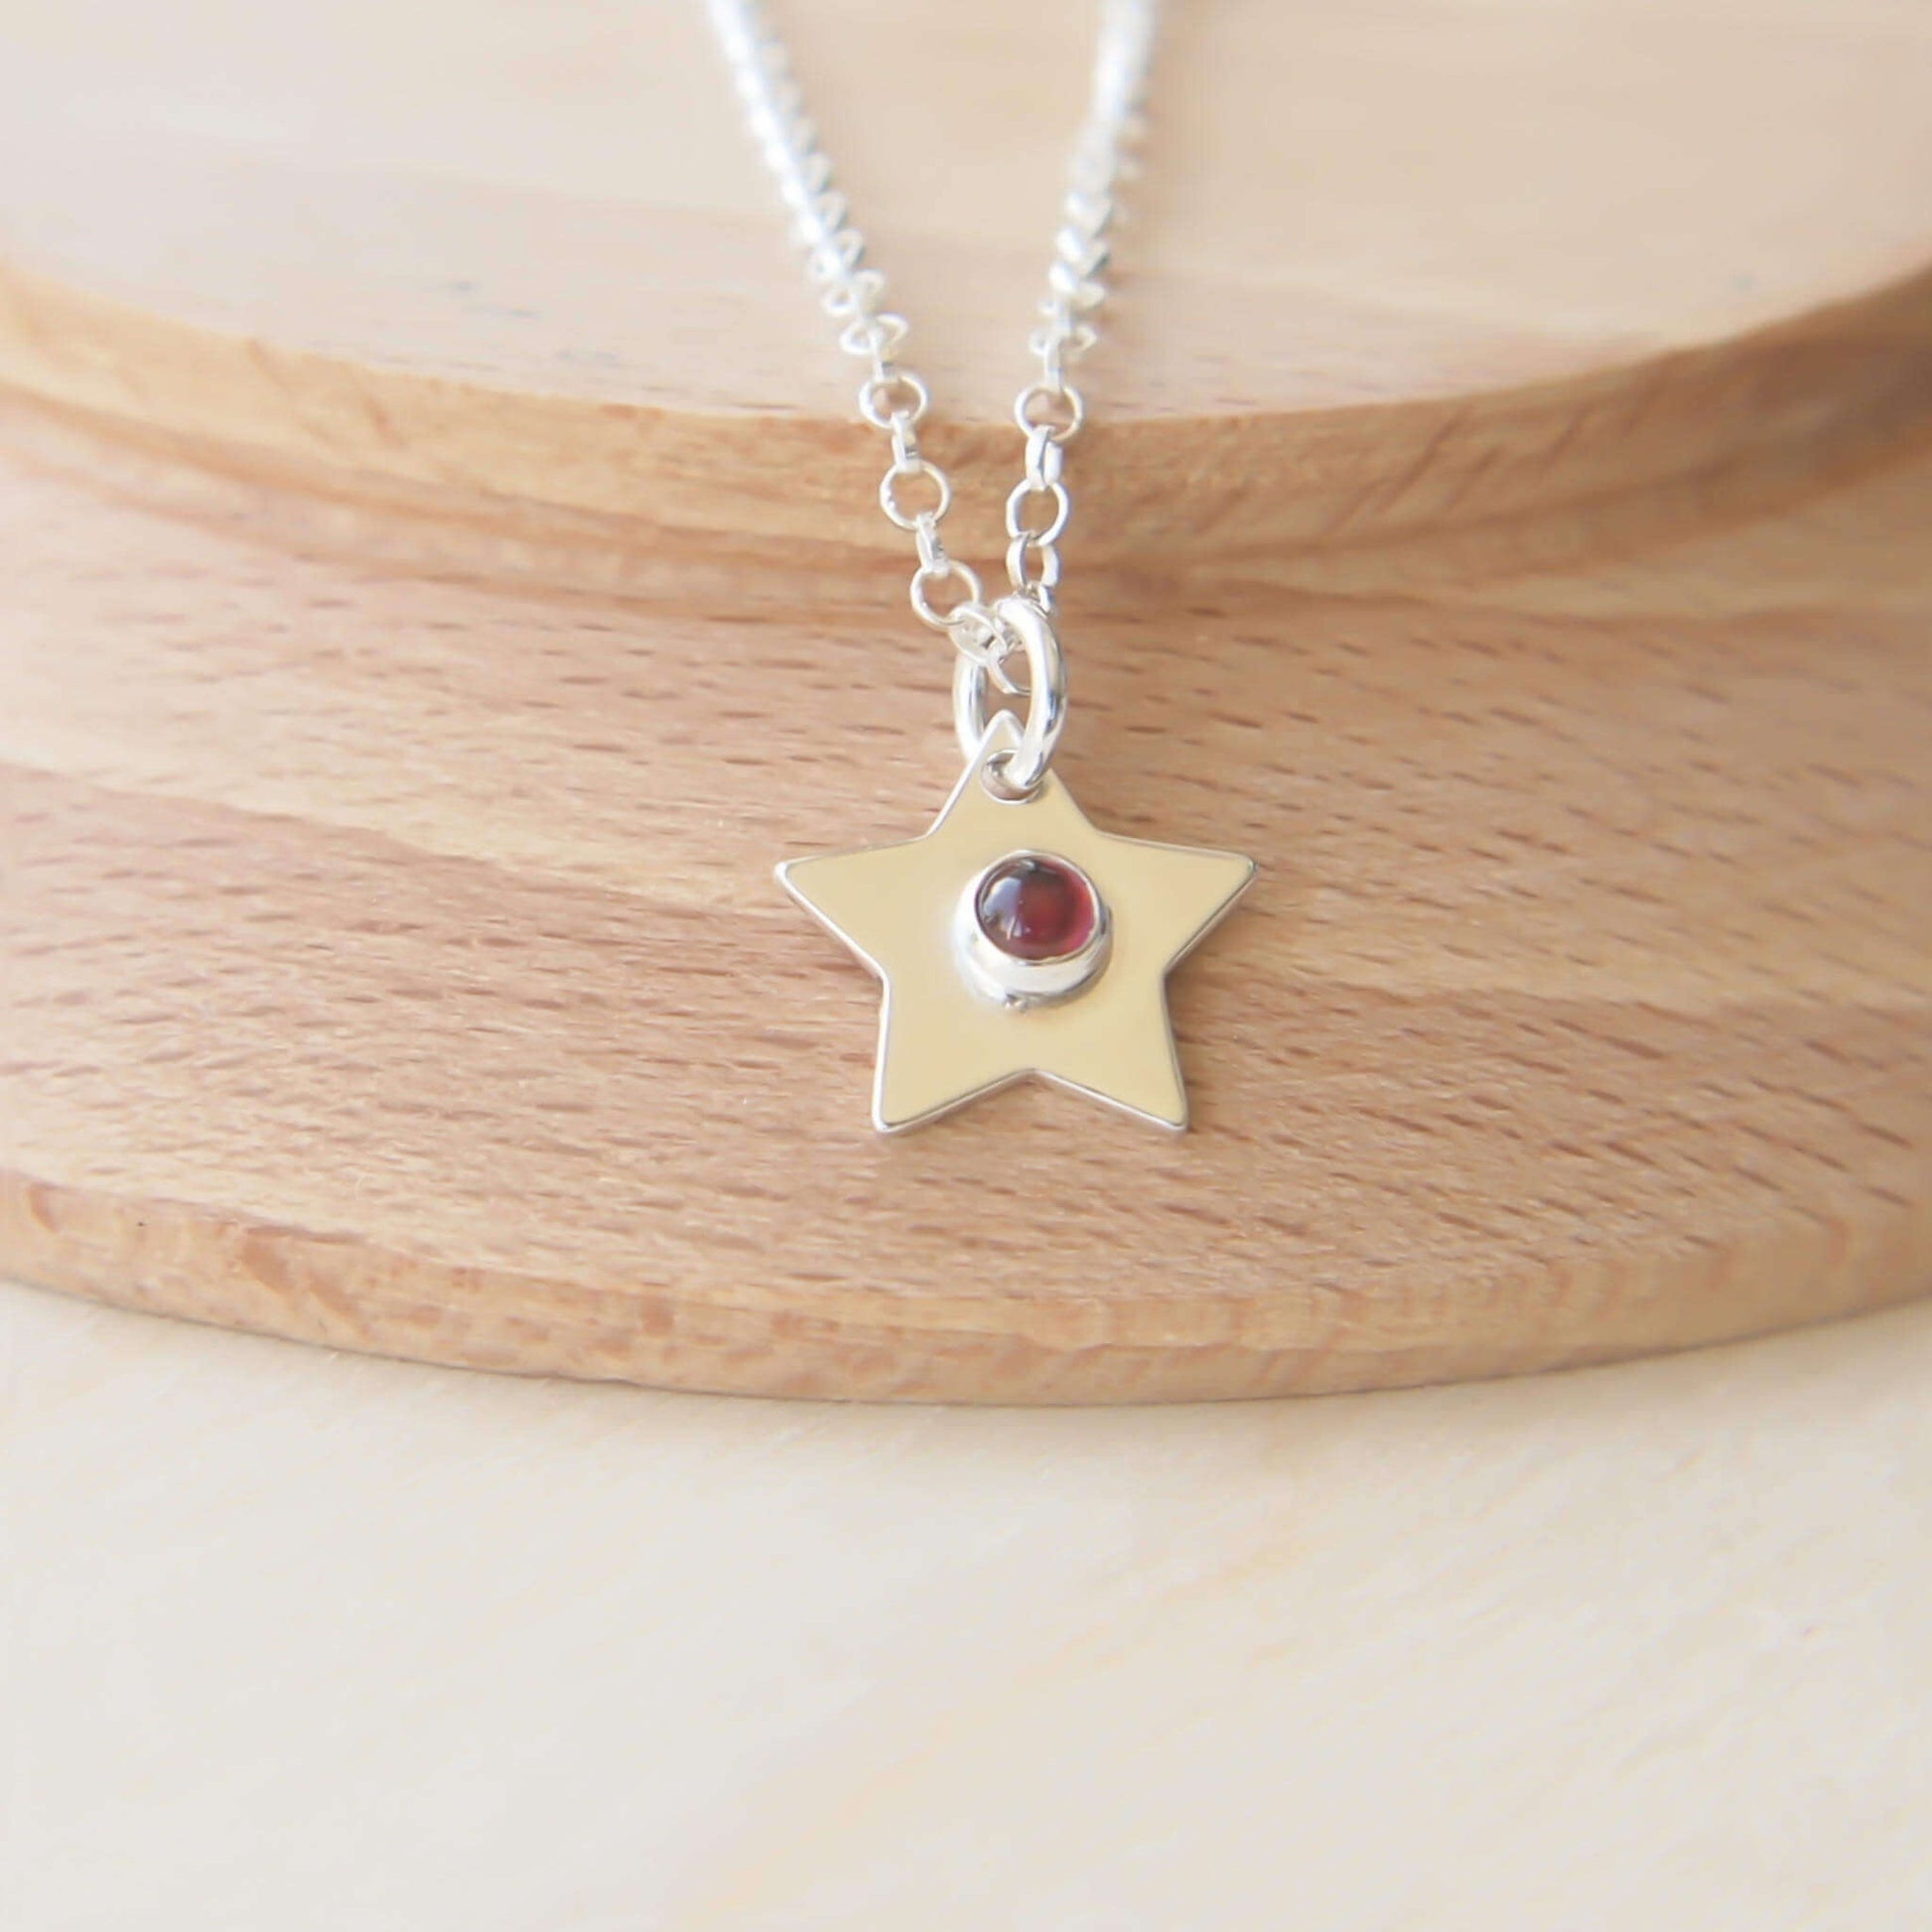 Small Silver Star Charm necklace with a deep red garnet centre. On a simple silver chain to create a necklace for all ages. Handmade by maram jewellery in UK